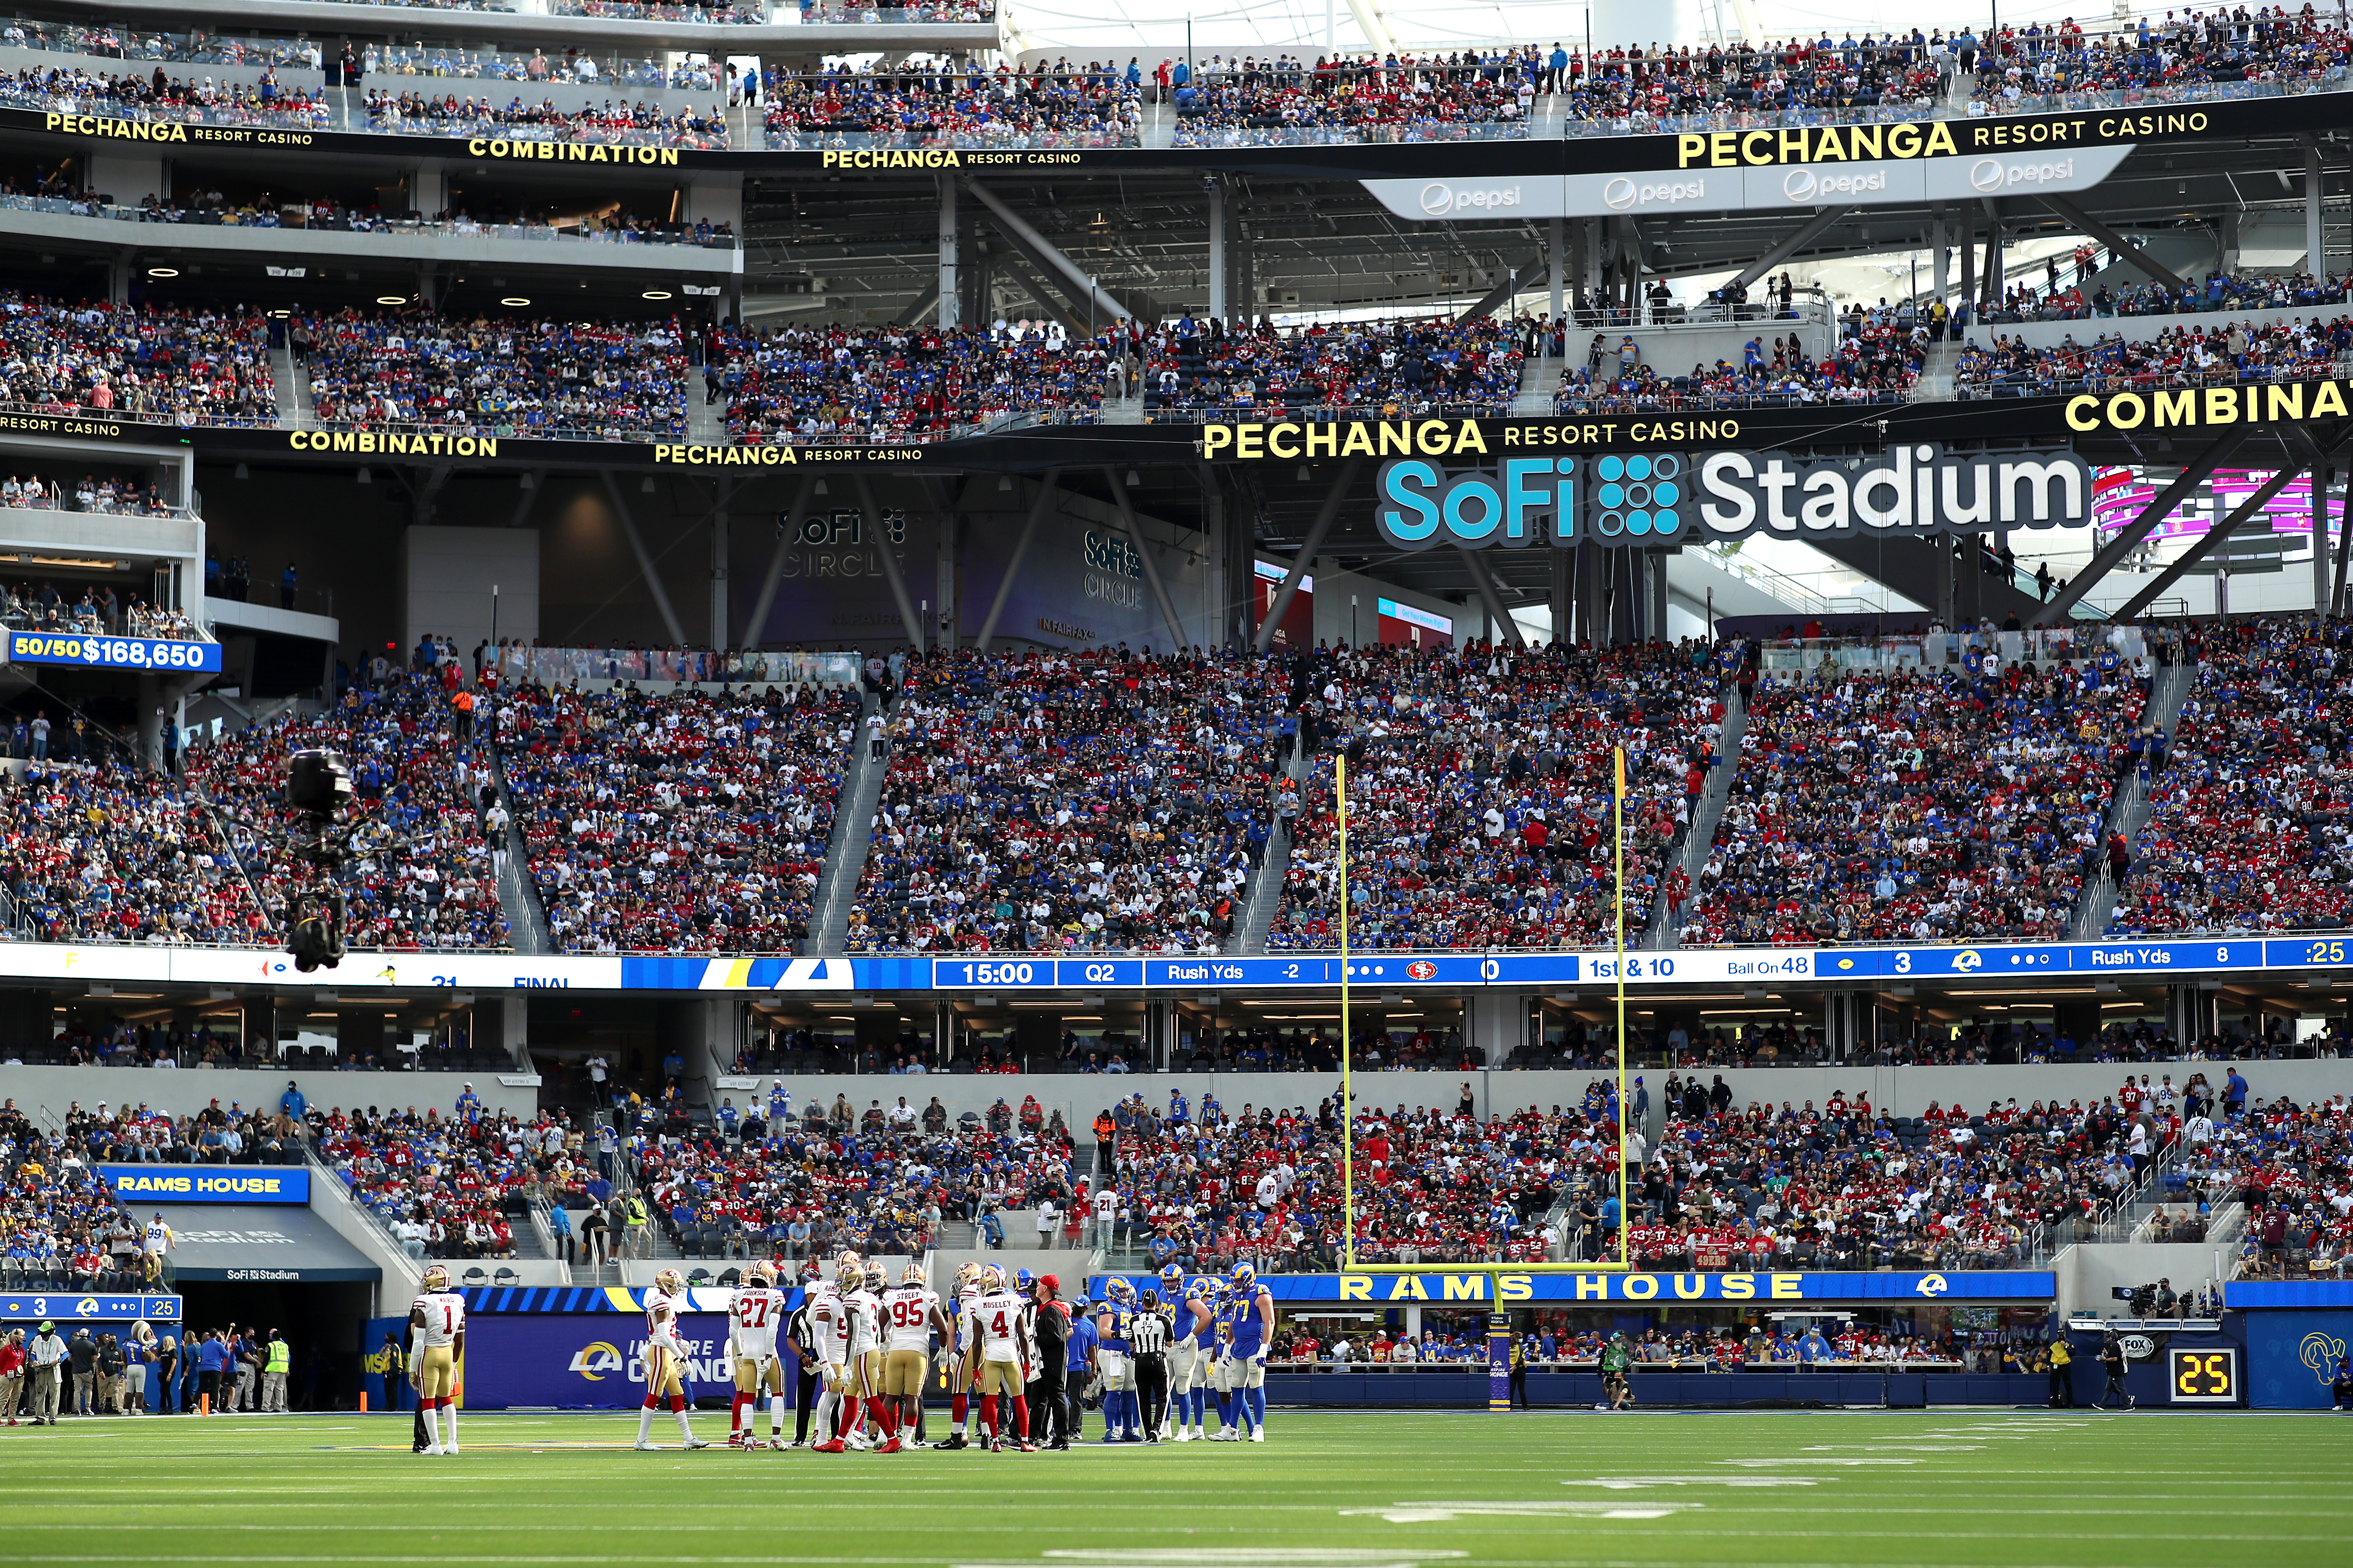 49ers vs Rams Ticket Prices Reveal Expensive Options Ahead of NFC  Championship Game